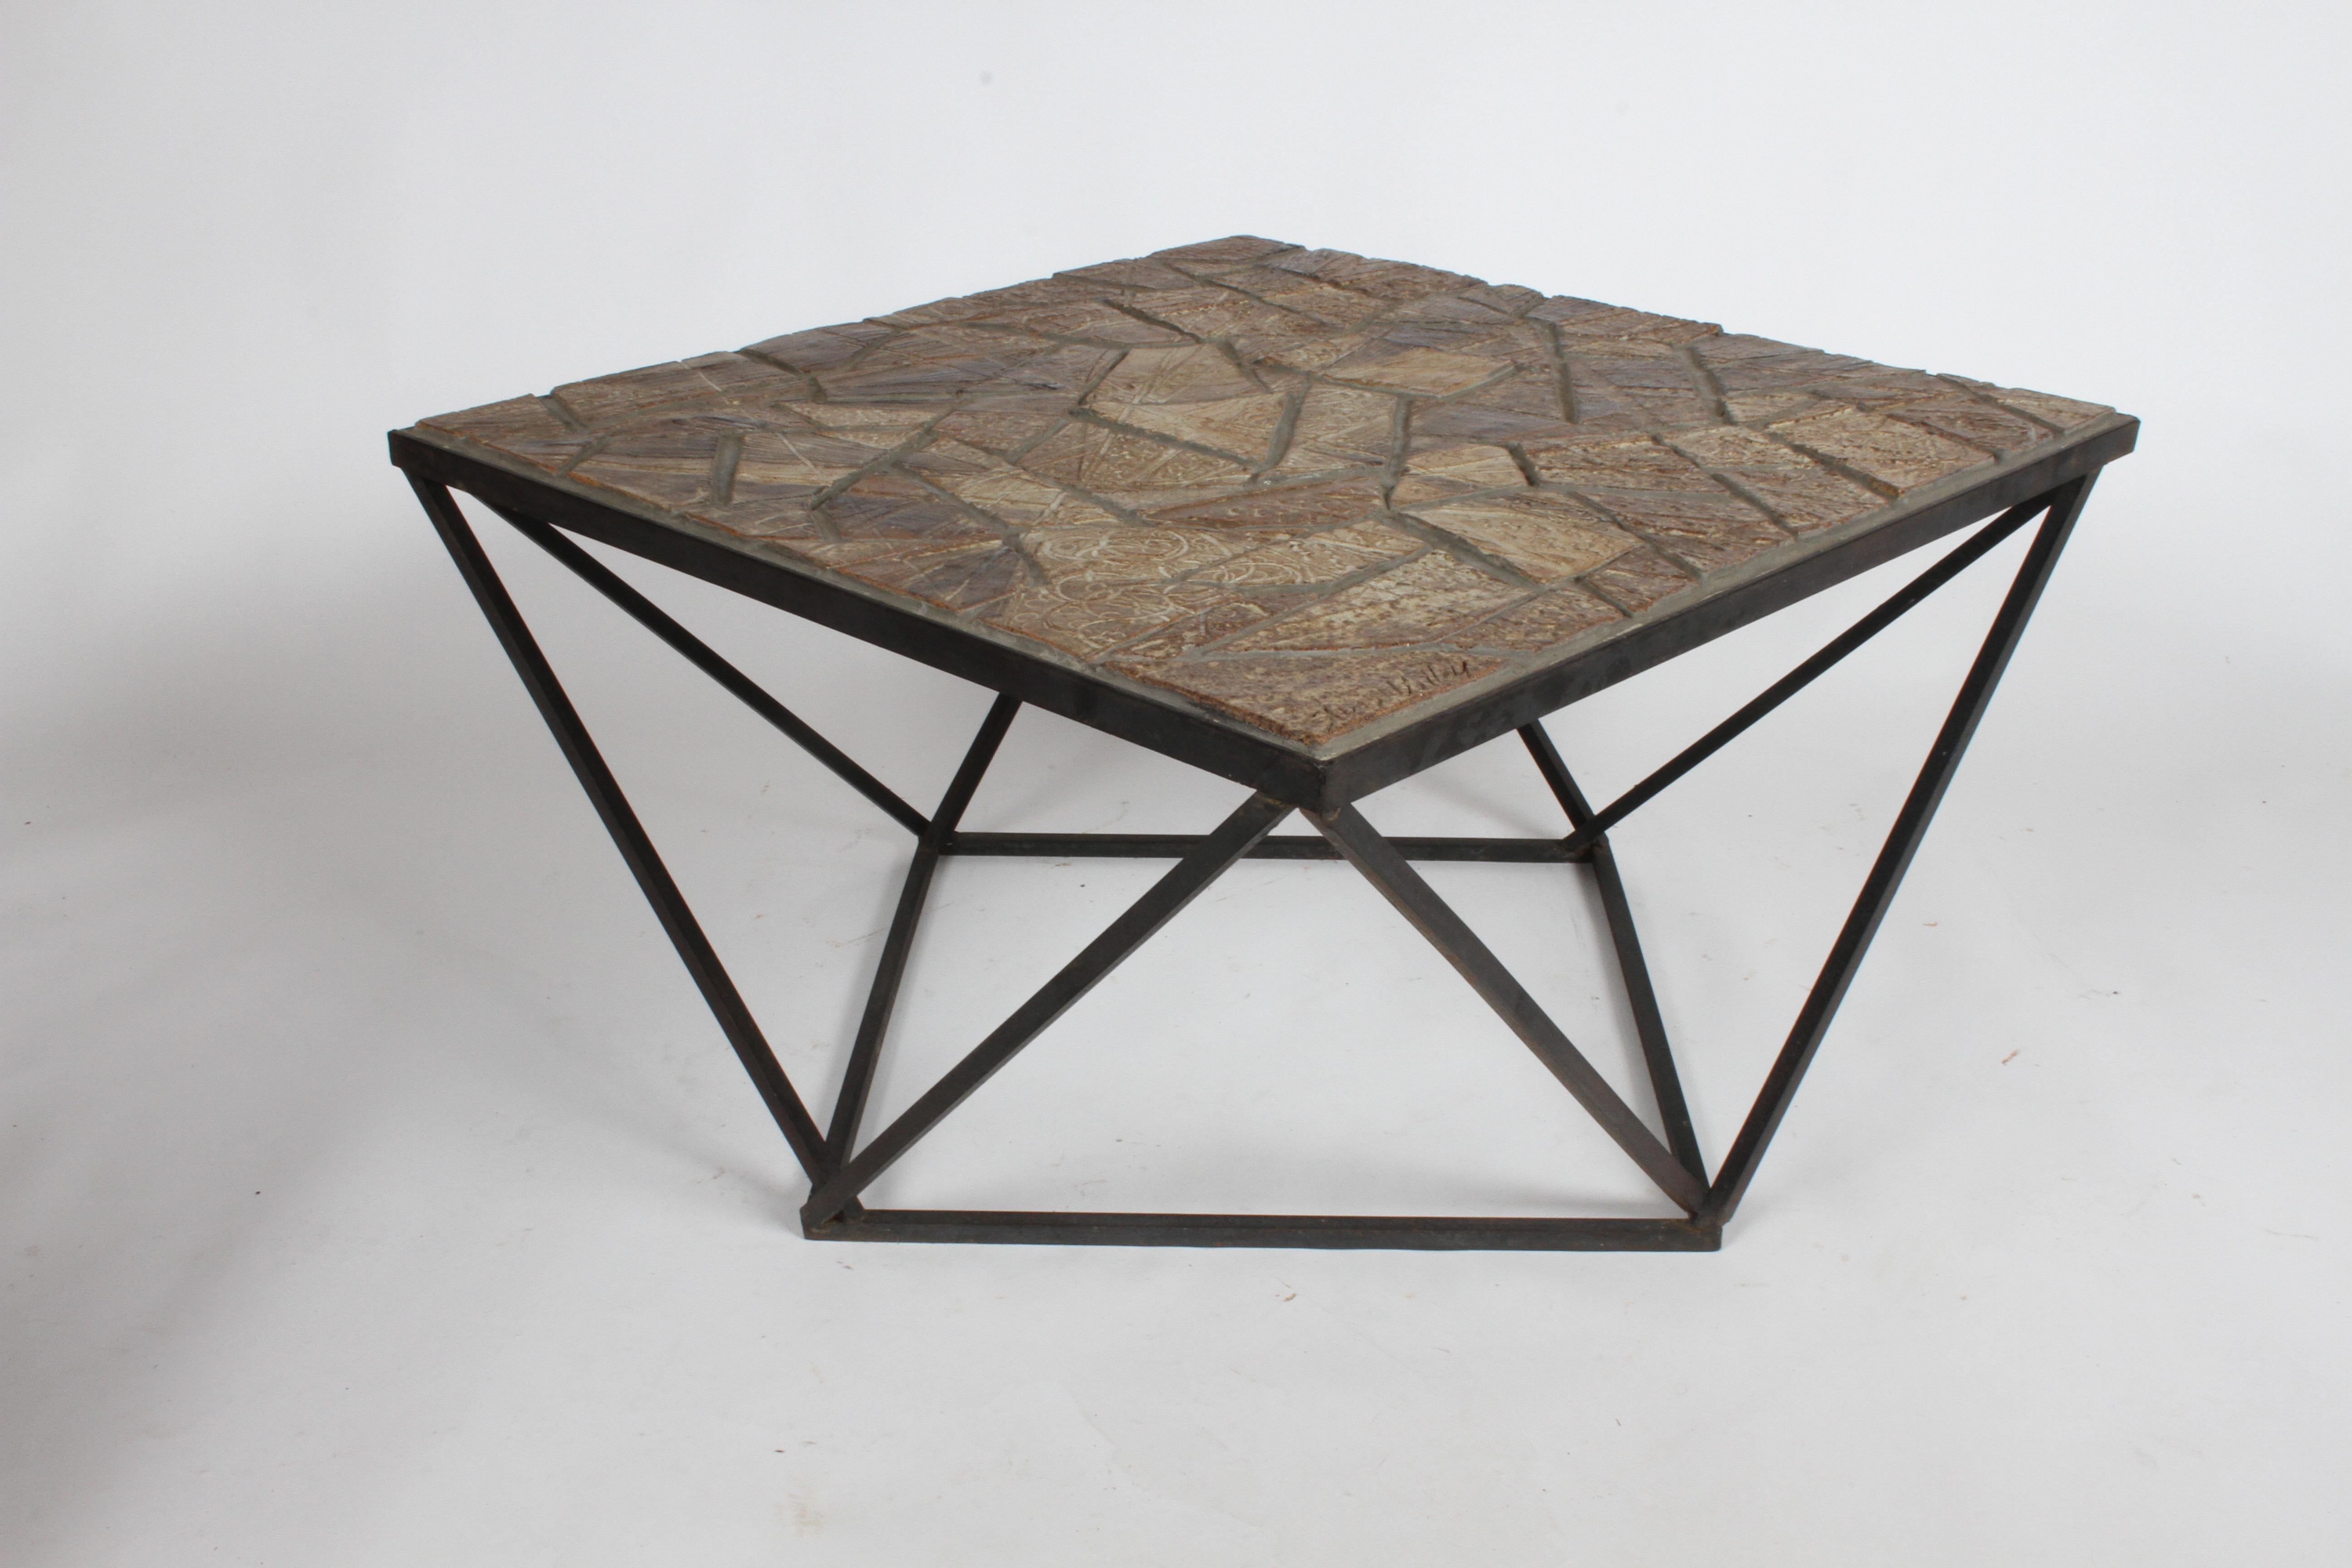 Artist Jesse Ormond Sanderson Jr. for Straw Valley Pottery of Chapel Hill, NC. Possibly one of a kind geometric / cubist coffee table with offset squares. Signed Straw Valley '61 JOS for J. Ormond Sanderson. Modernist form iron base with carefully